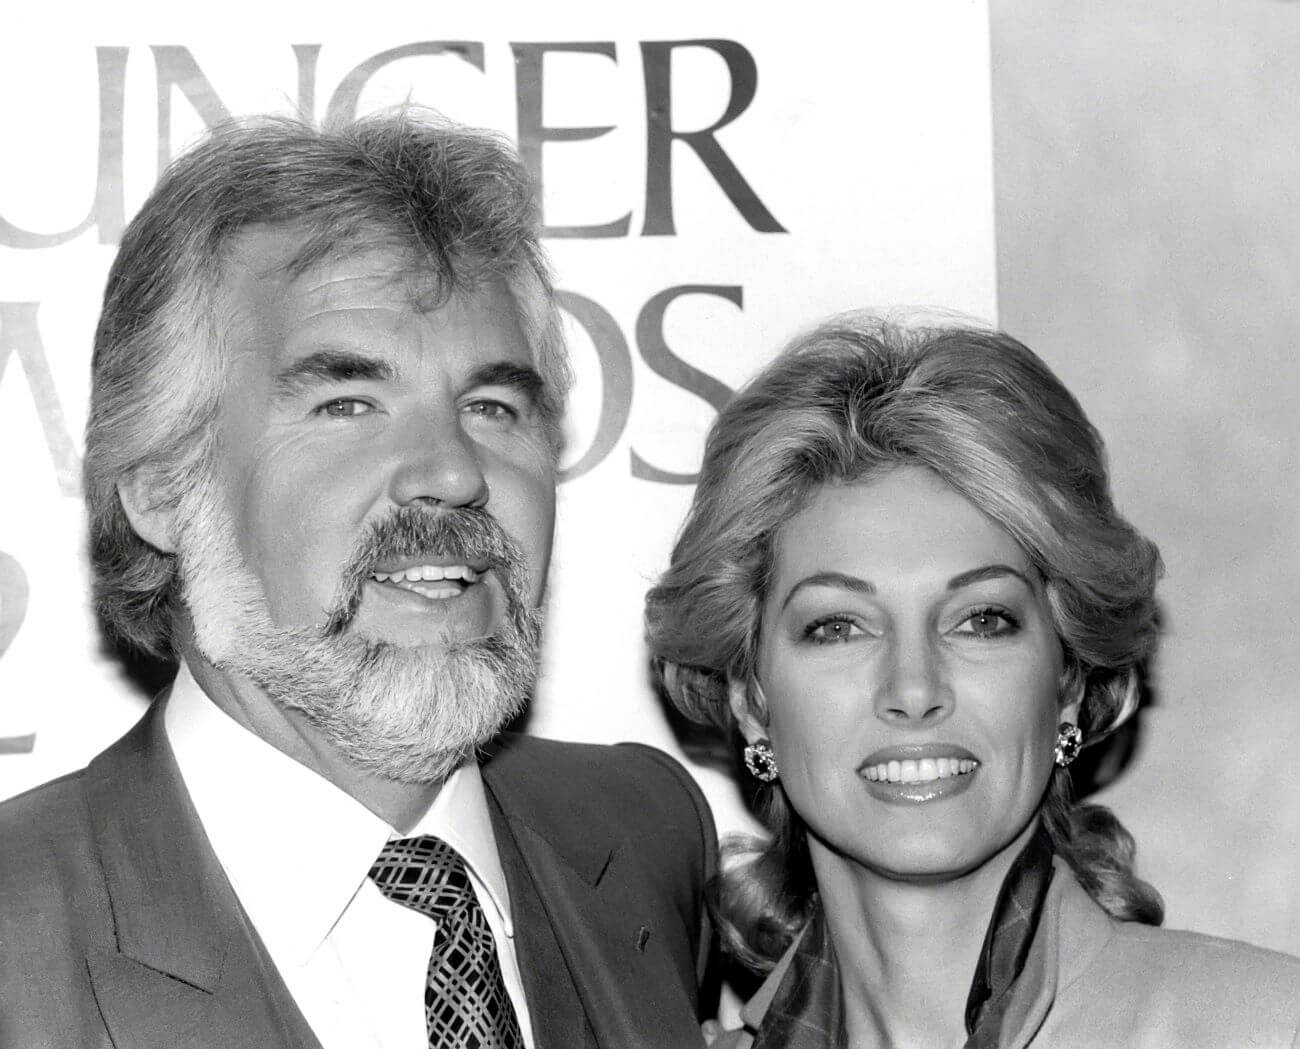 A black and white picture of Kenny Rogers and his wife Marianne Gordon posing in front of a sign.